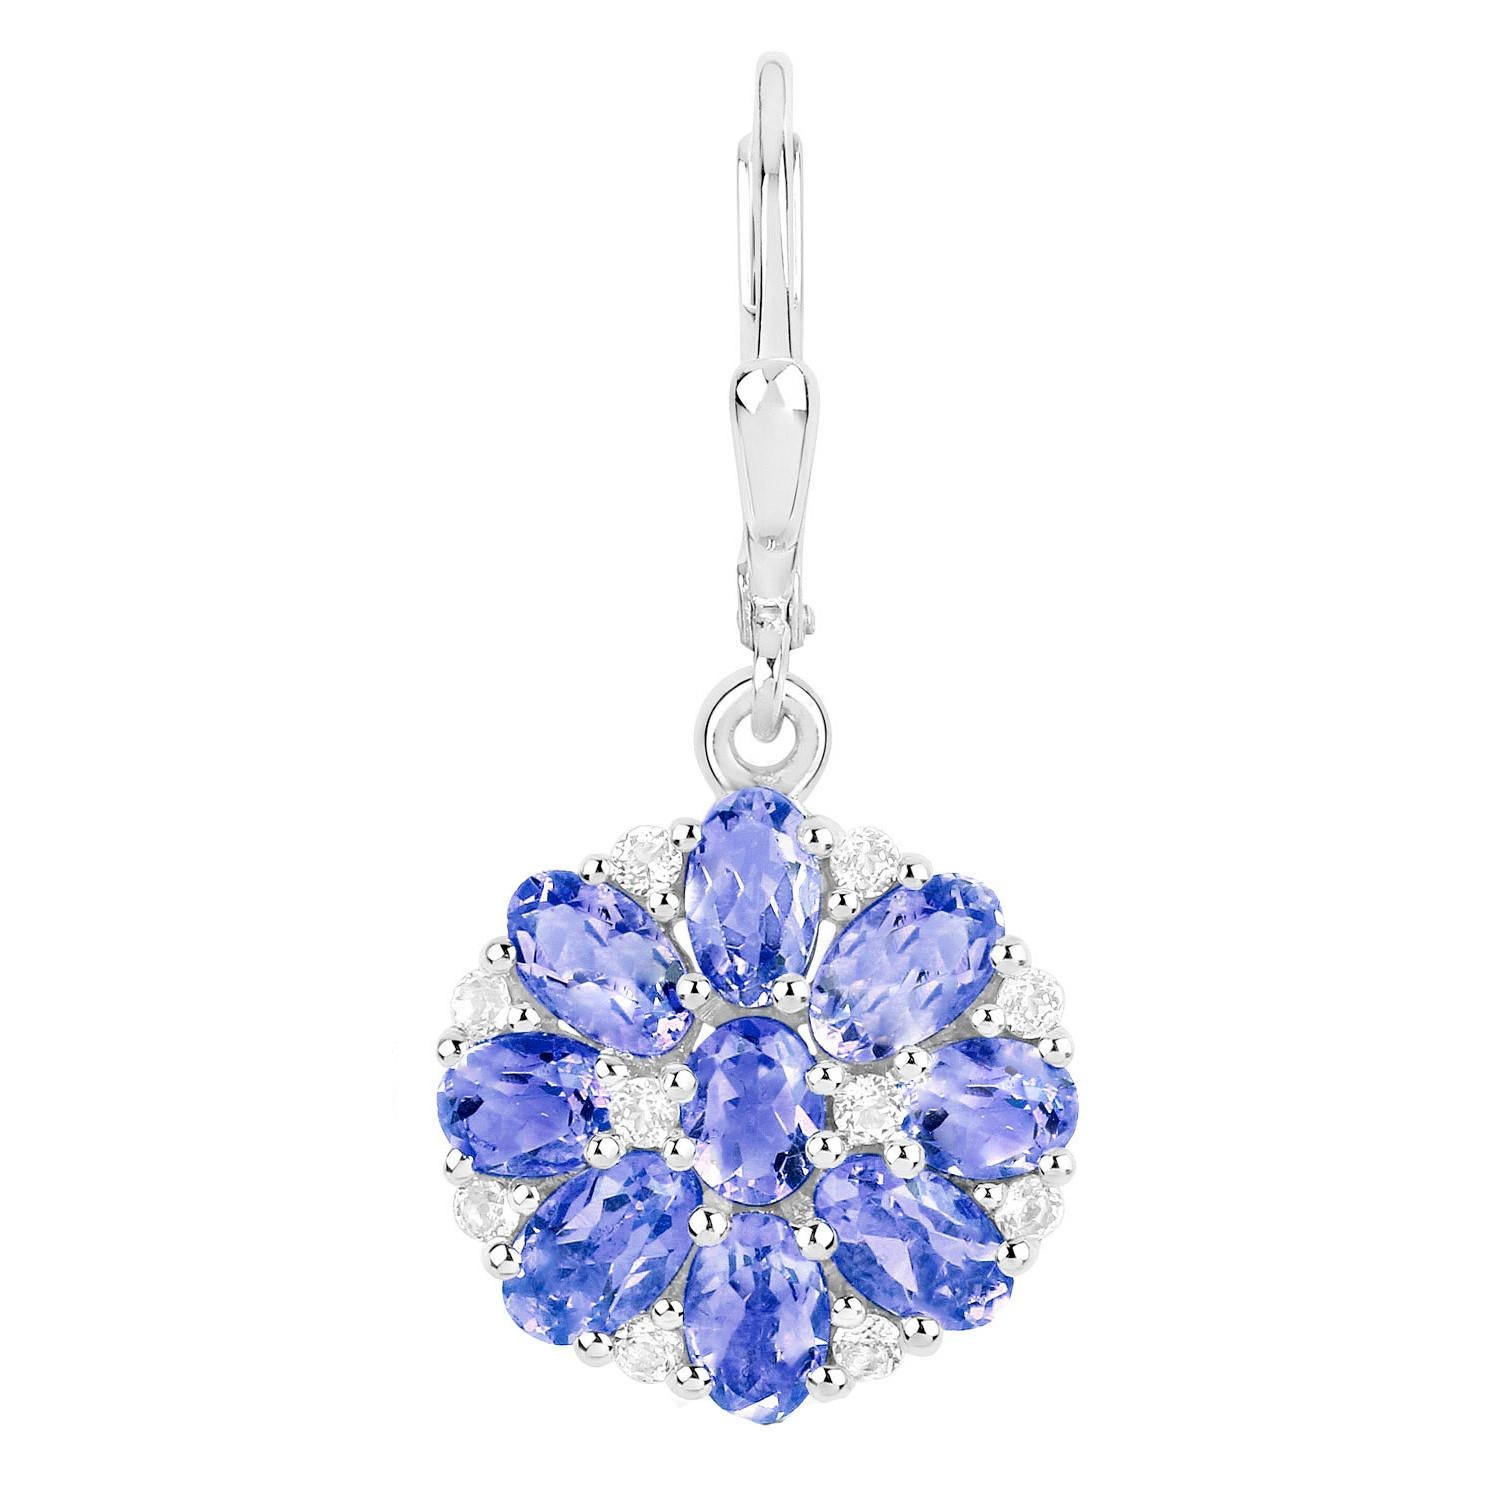 Oval Cut Tanzanite Cluster Dangle Earrings White Topaz 2.9 Carats For Sale